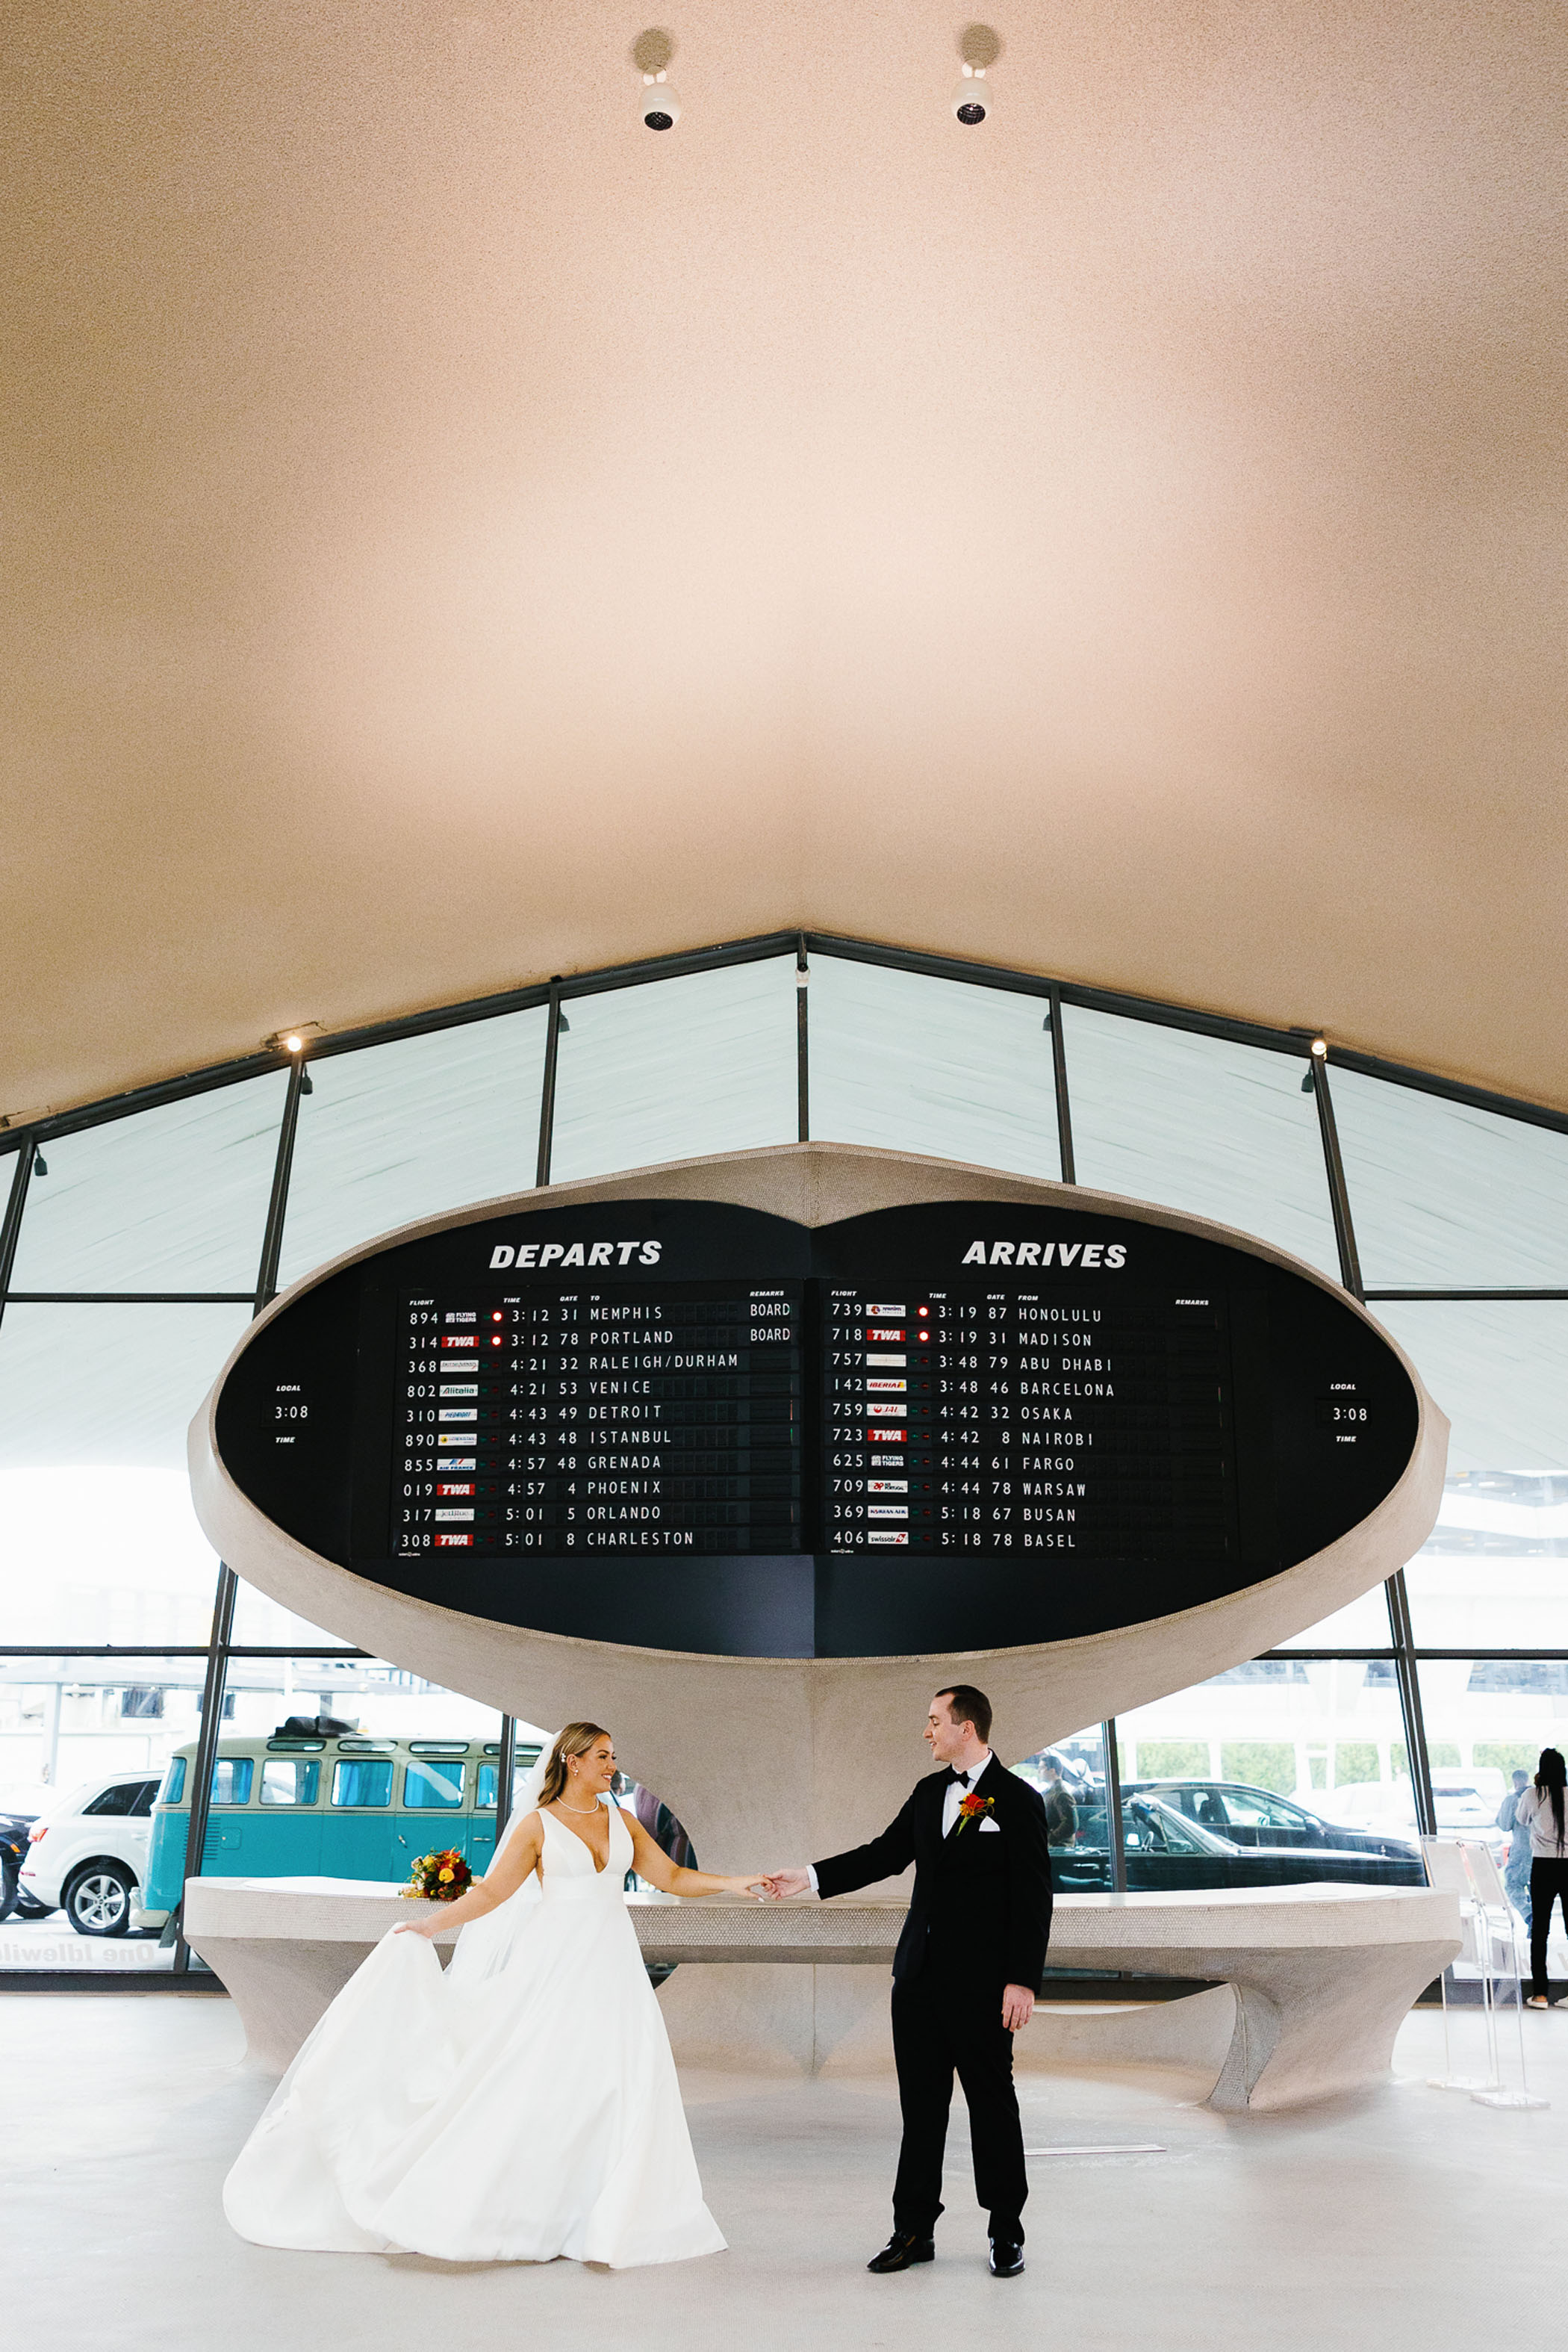 60s Wedding at TWA Hotel for a Pilot and Flight Attendant